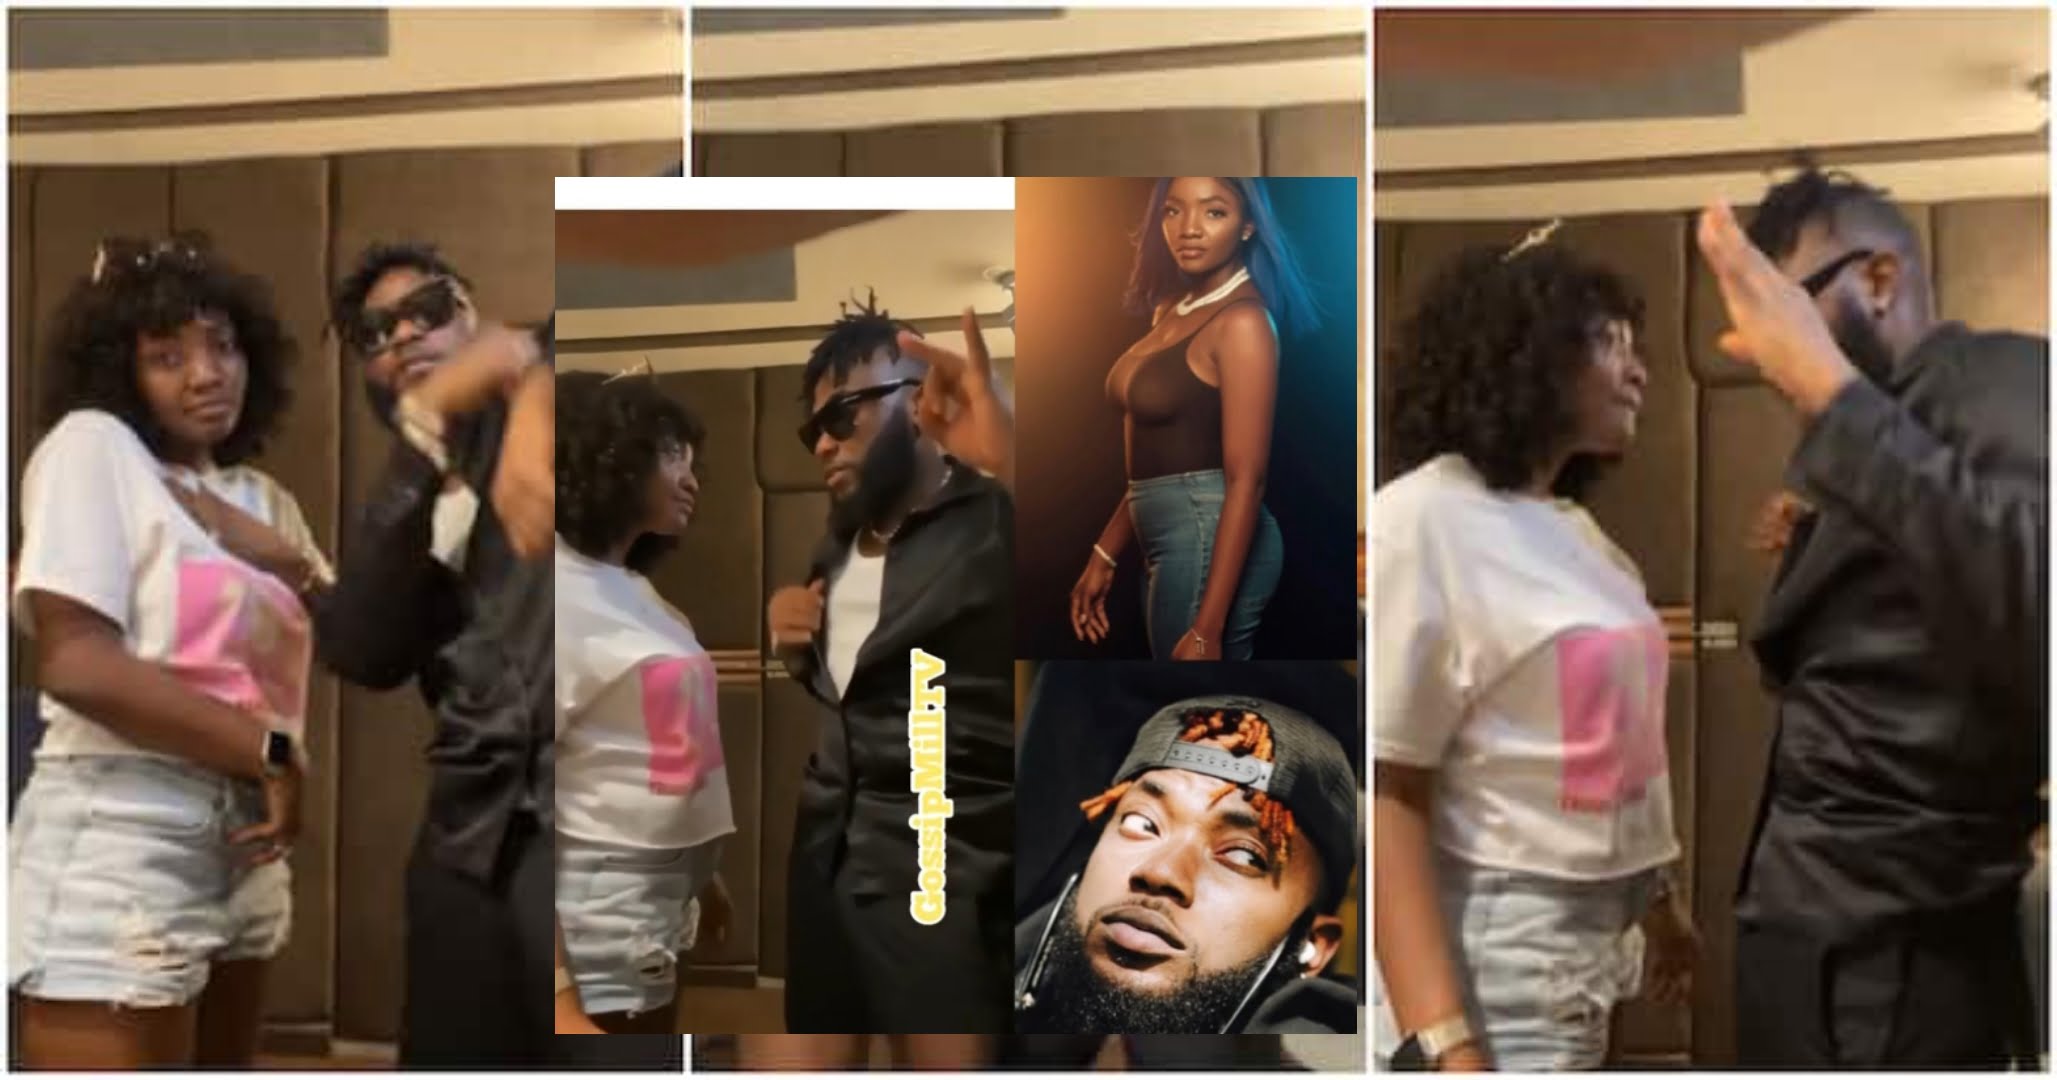 Make Adekunle Gold No See Una: Rapper Dremo and Simi Spark Viral Reactions As They Act ‘Lovey Dovey’ in Video